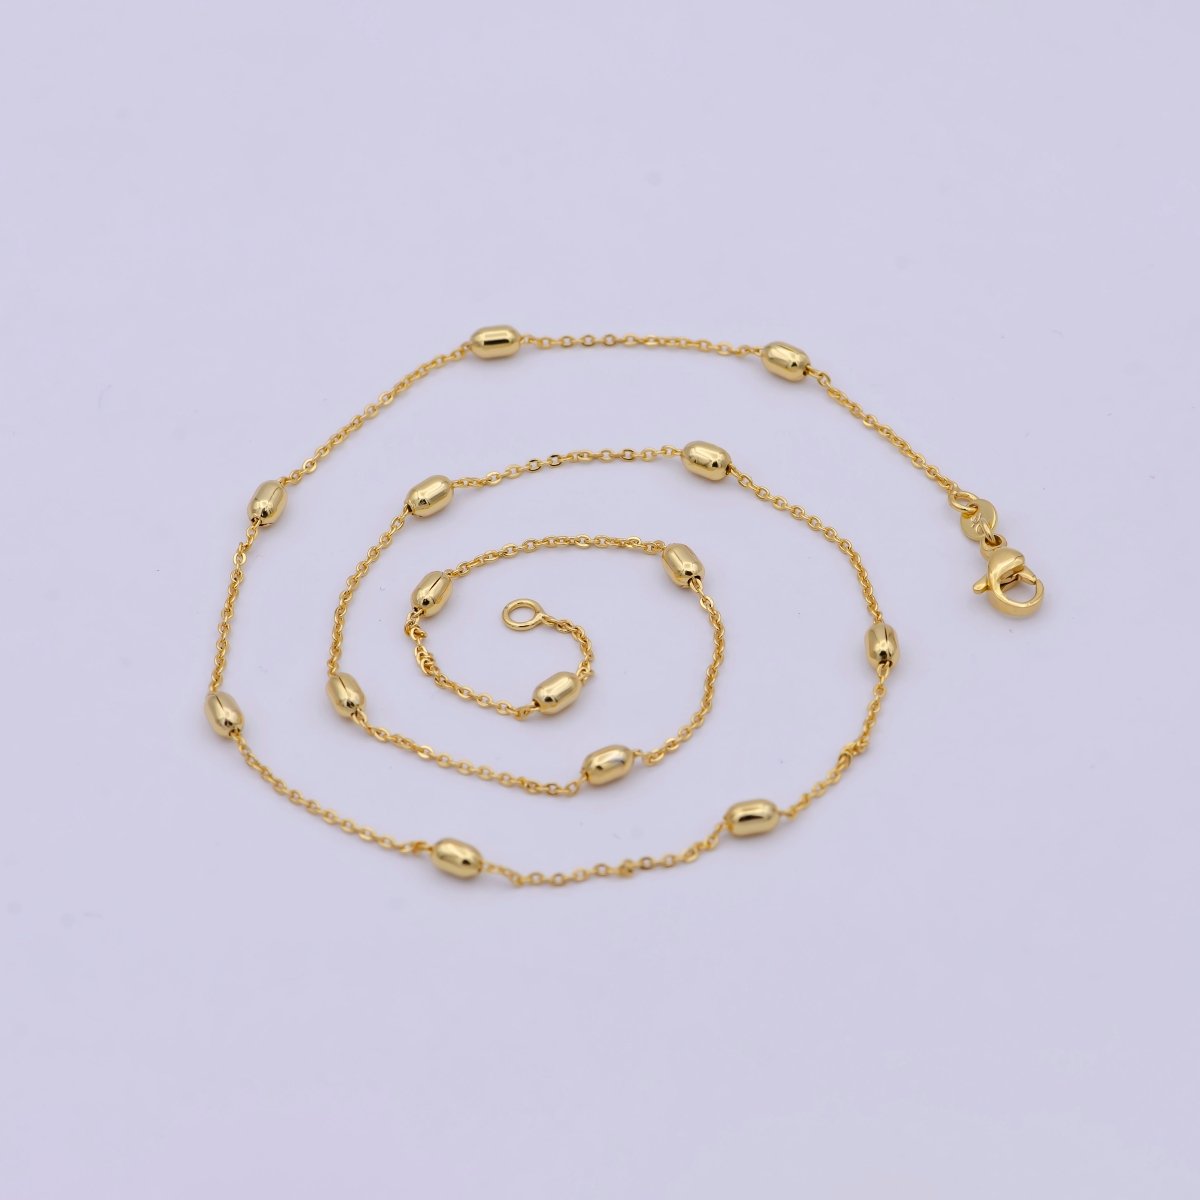 1 mm Satellite necklace, 24k gold filled chain Bead, Dainty gold filled chain, minimalist necklace 17.7 inch chain | WA-741 Clearance Pricing - DLUXCA